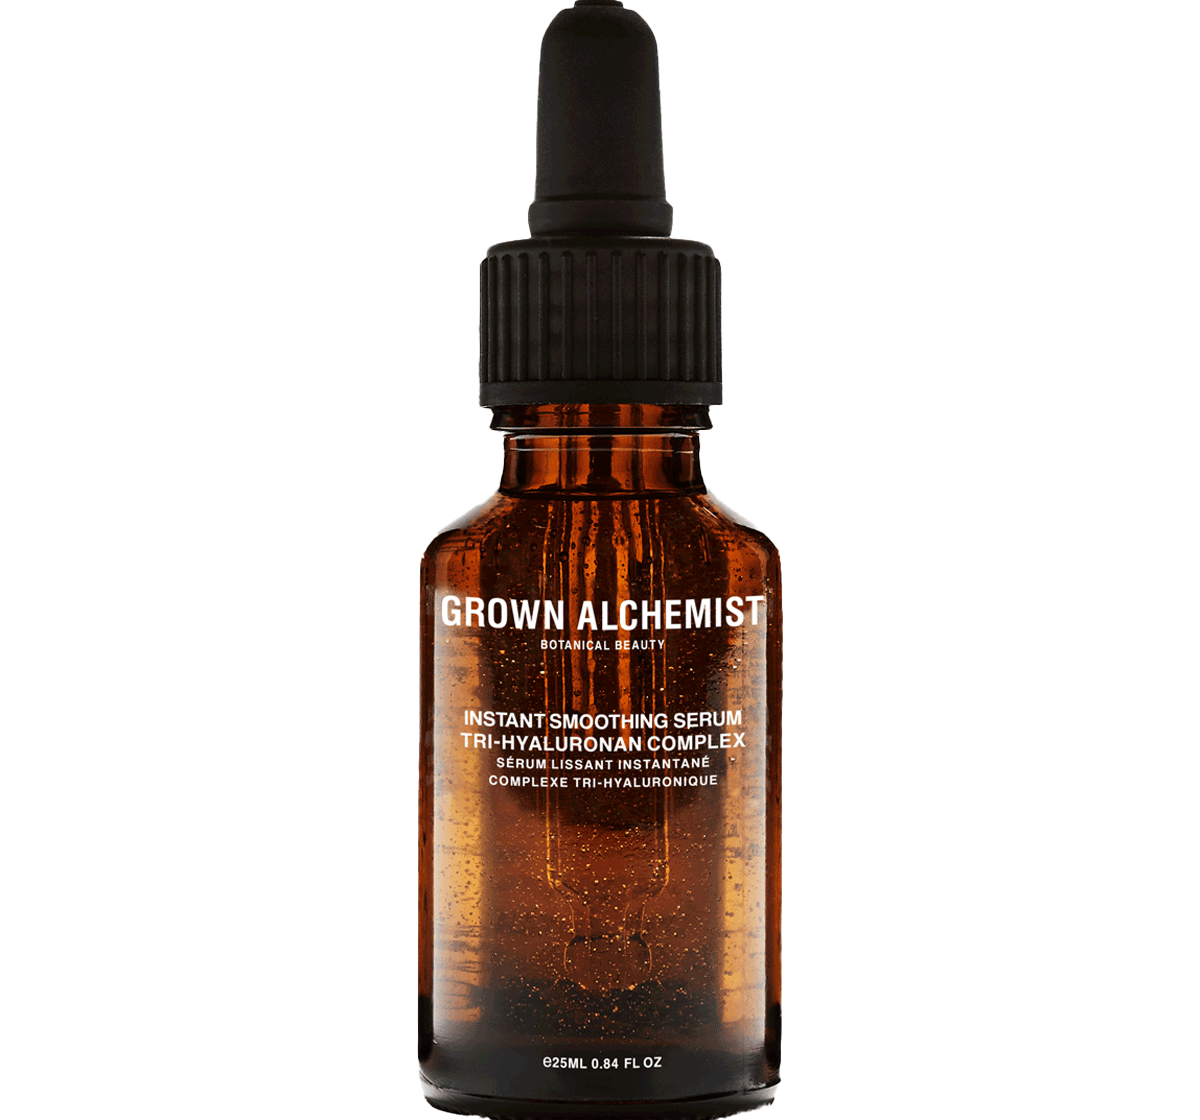 cosmetic Instant Paris online | Alchemist Grown Paris Complex Tri-Hyaluronan | concept Retail boutique NOSE Smoothing and from store in Serum